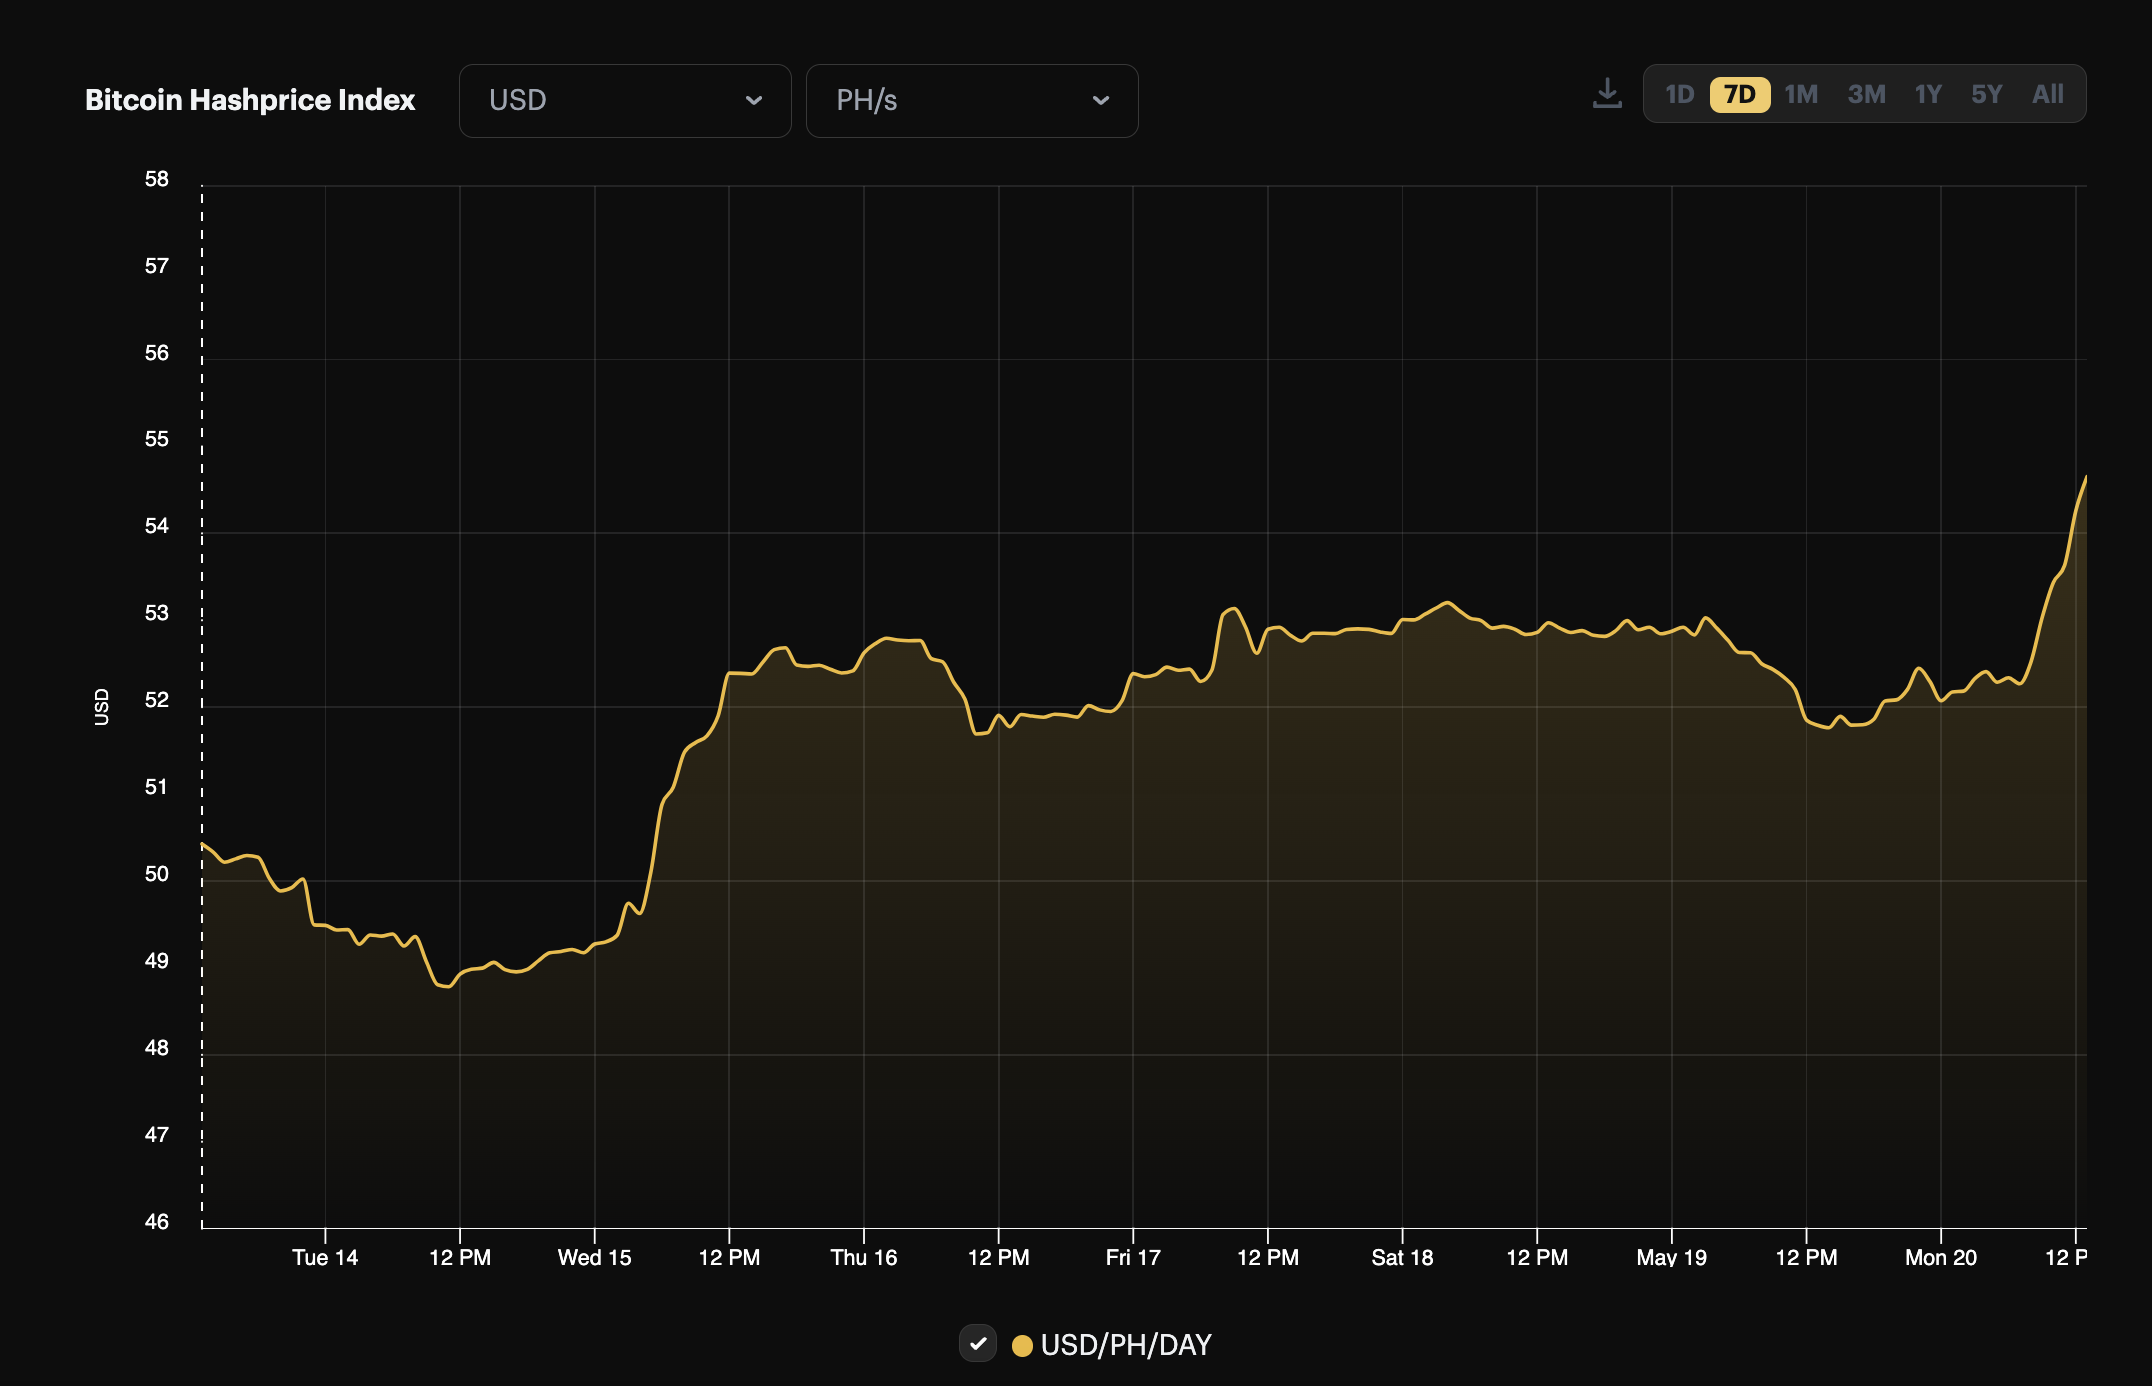 USD hashprice, 1-month view (March 29 - April 29, 2024)